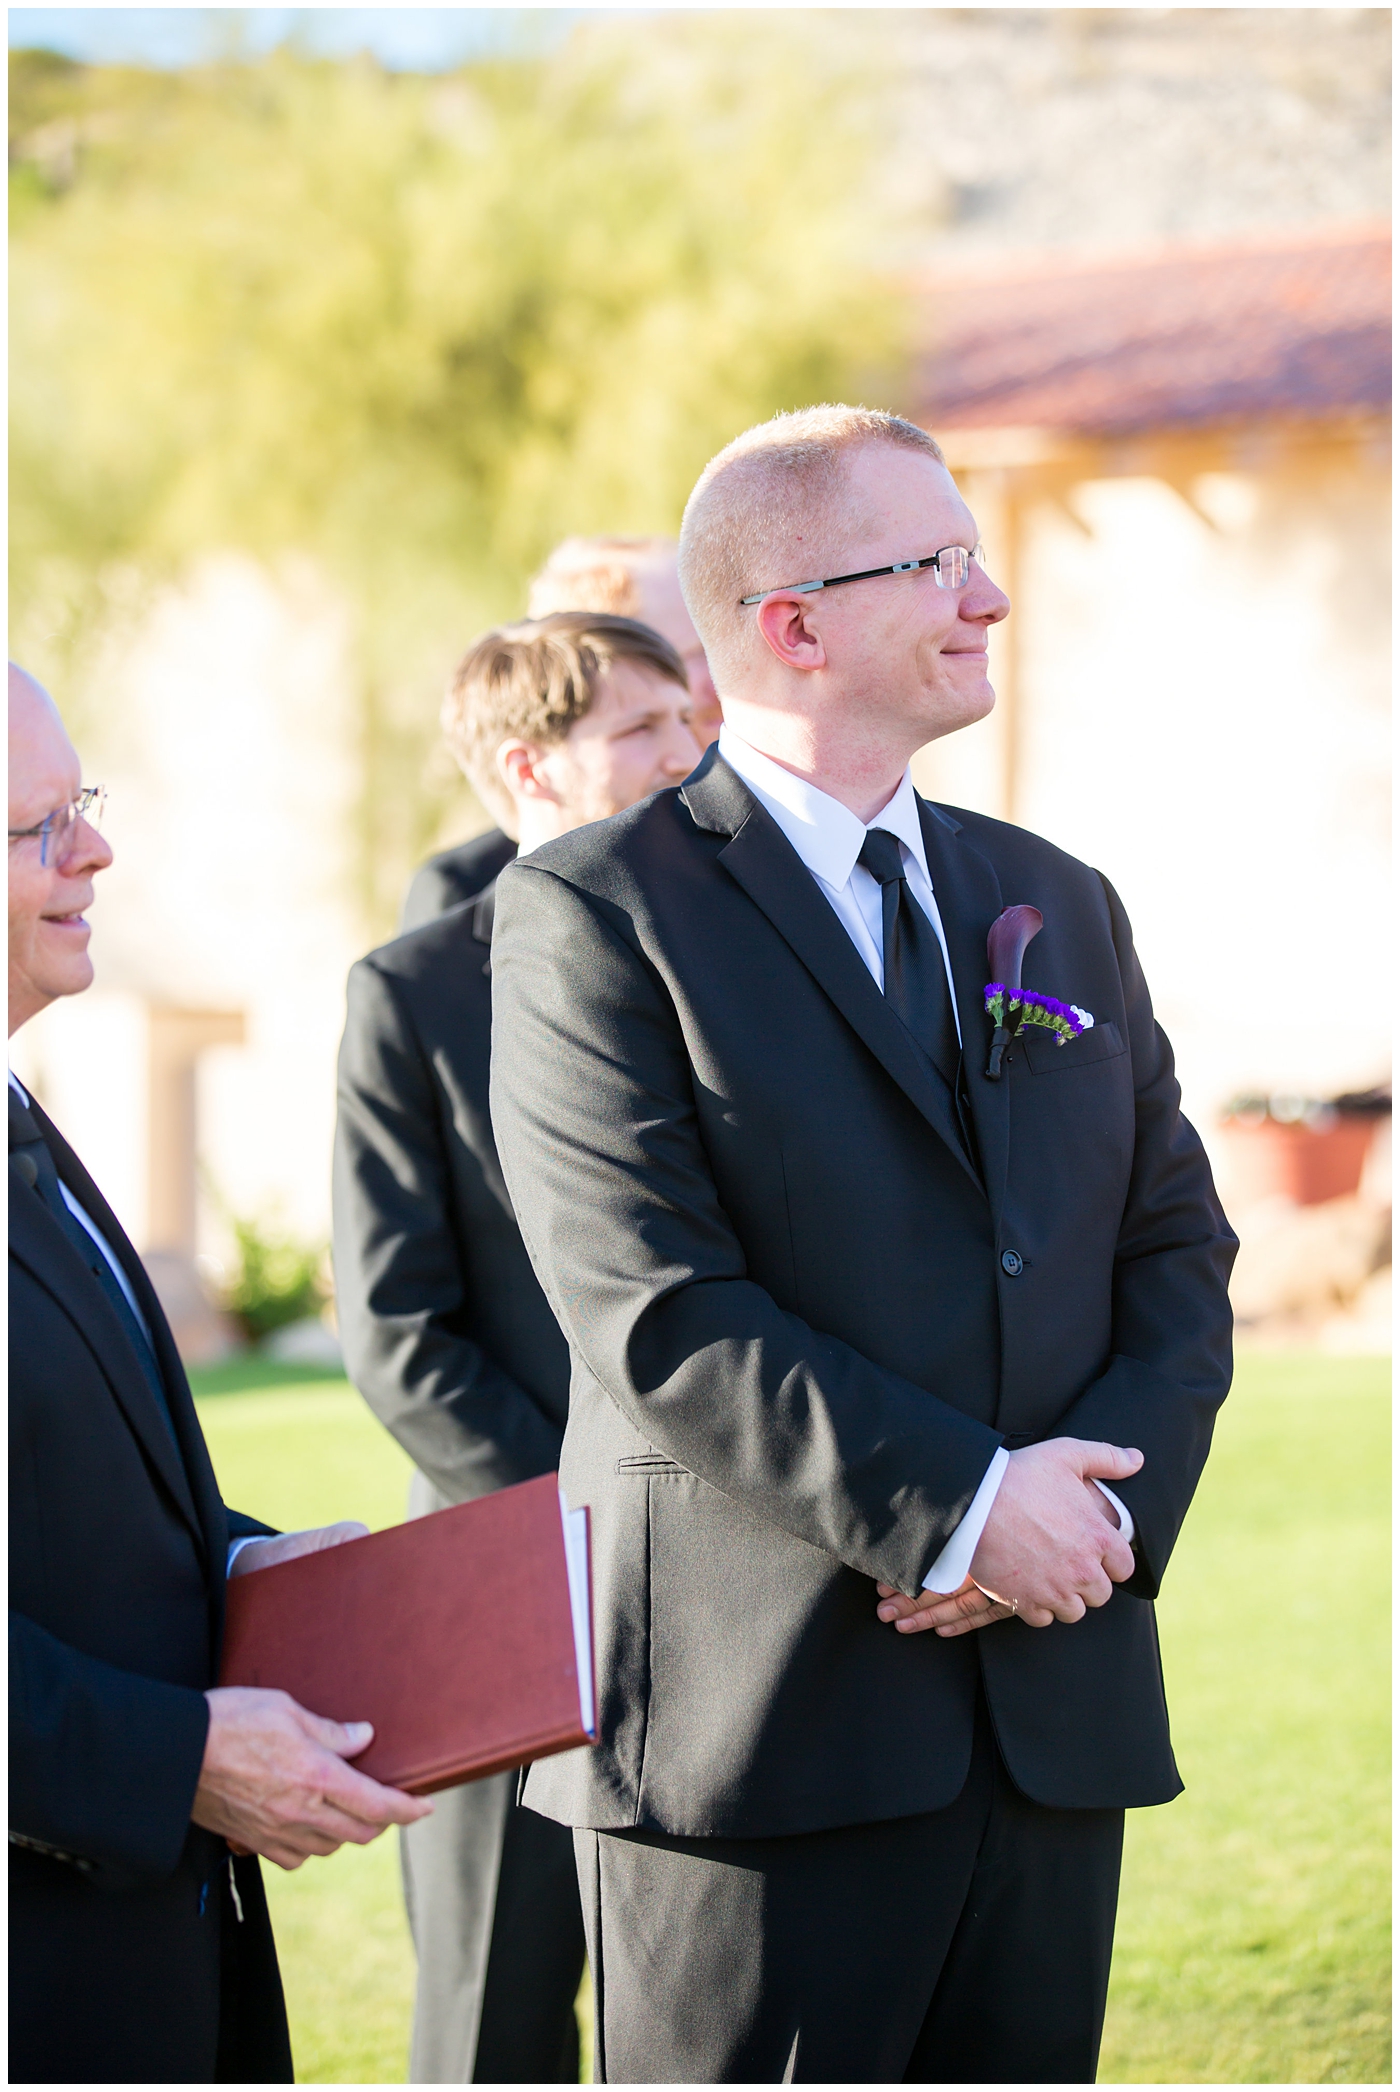 groom in black suit with purple calla lilly boutonniere waiting for bride to walk down the aisle at wedding ceremony